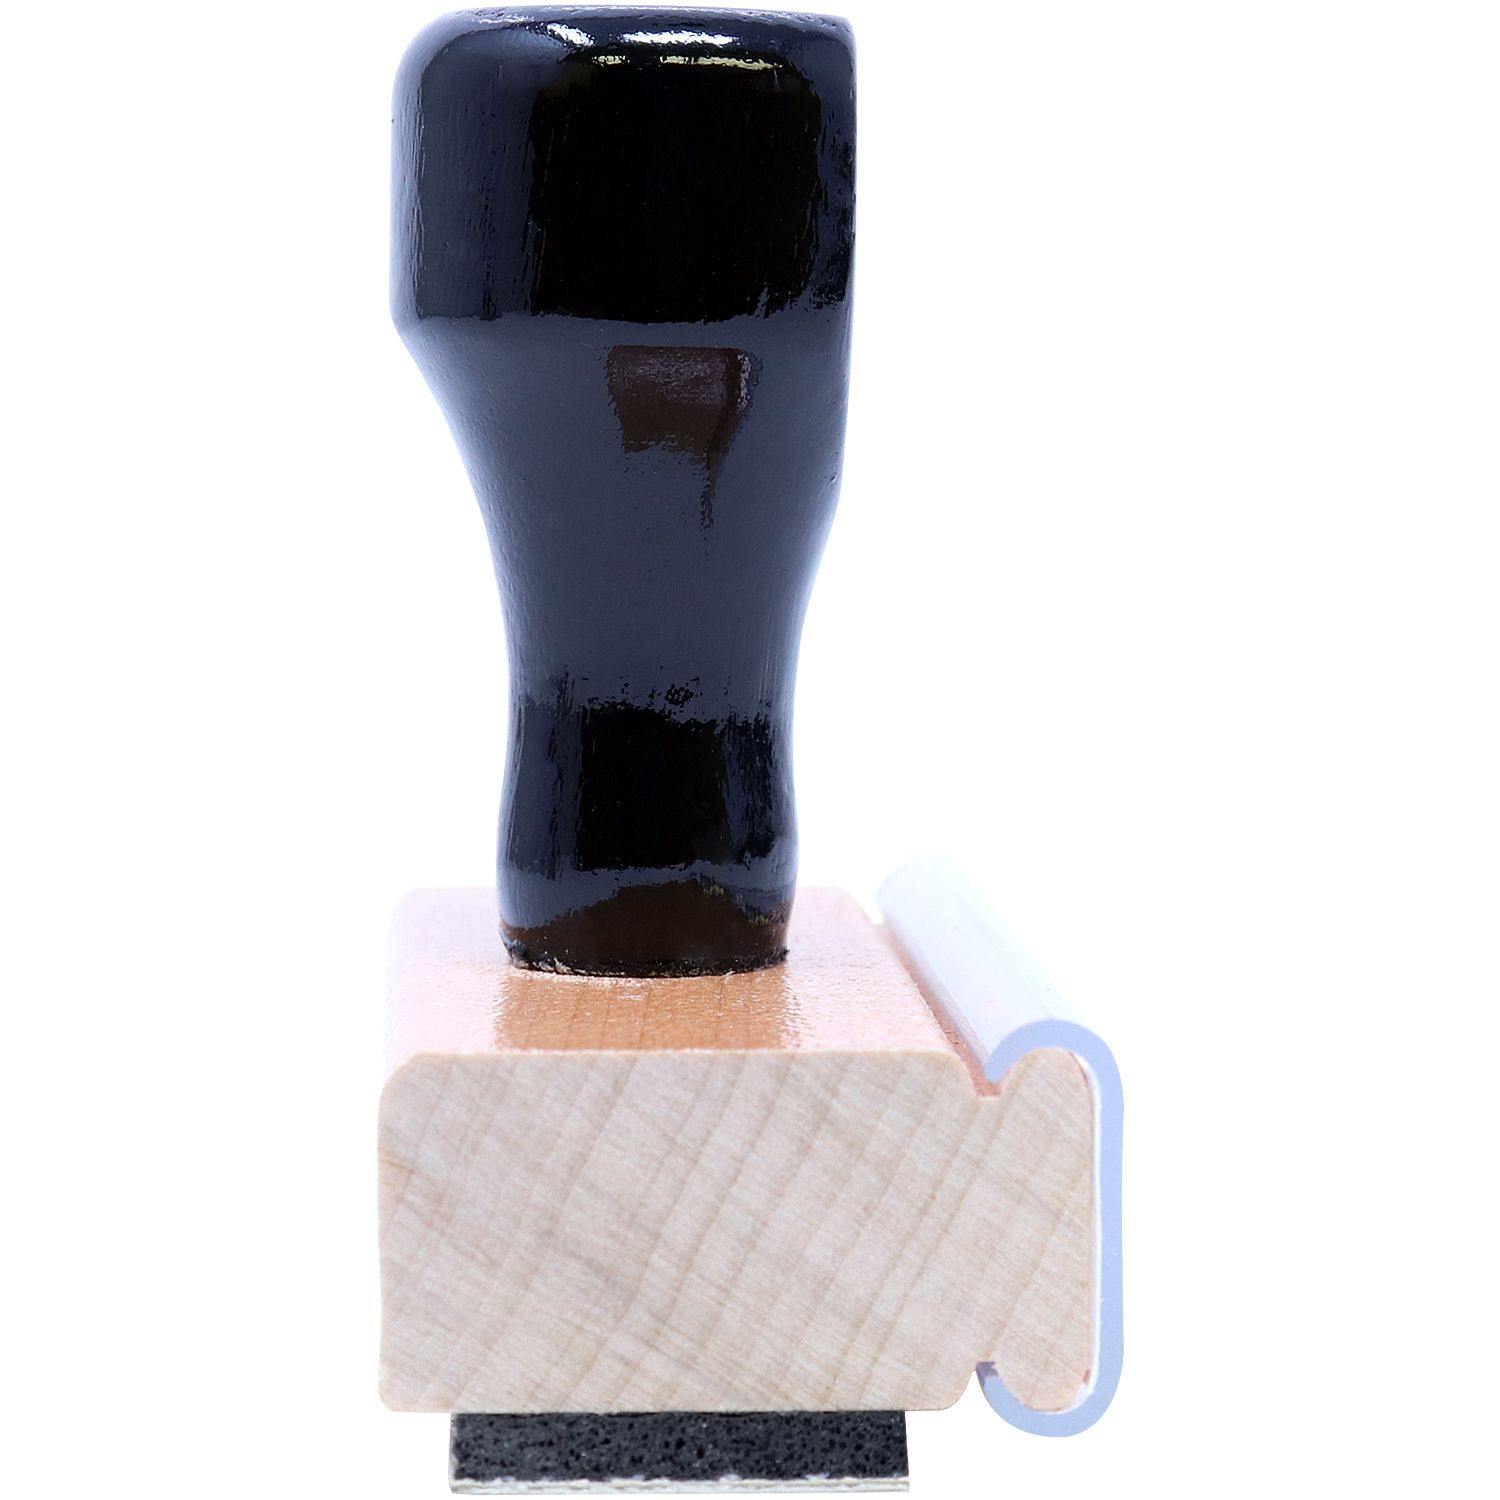 Narrow Font First Class Mail Rubber Stamp - Engineer Seal Stamps - Brand_Acorn, Impression Size_Small, Stamp Type_Regular Stamp, Type of Use_Business, Type of Use_Postal & Mailing, Type of Use_Professional